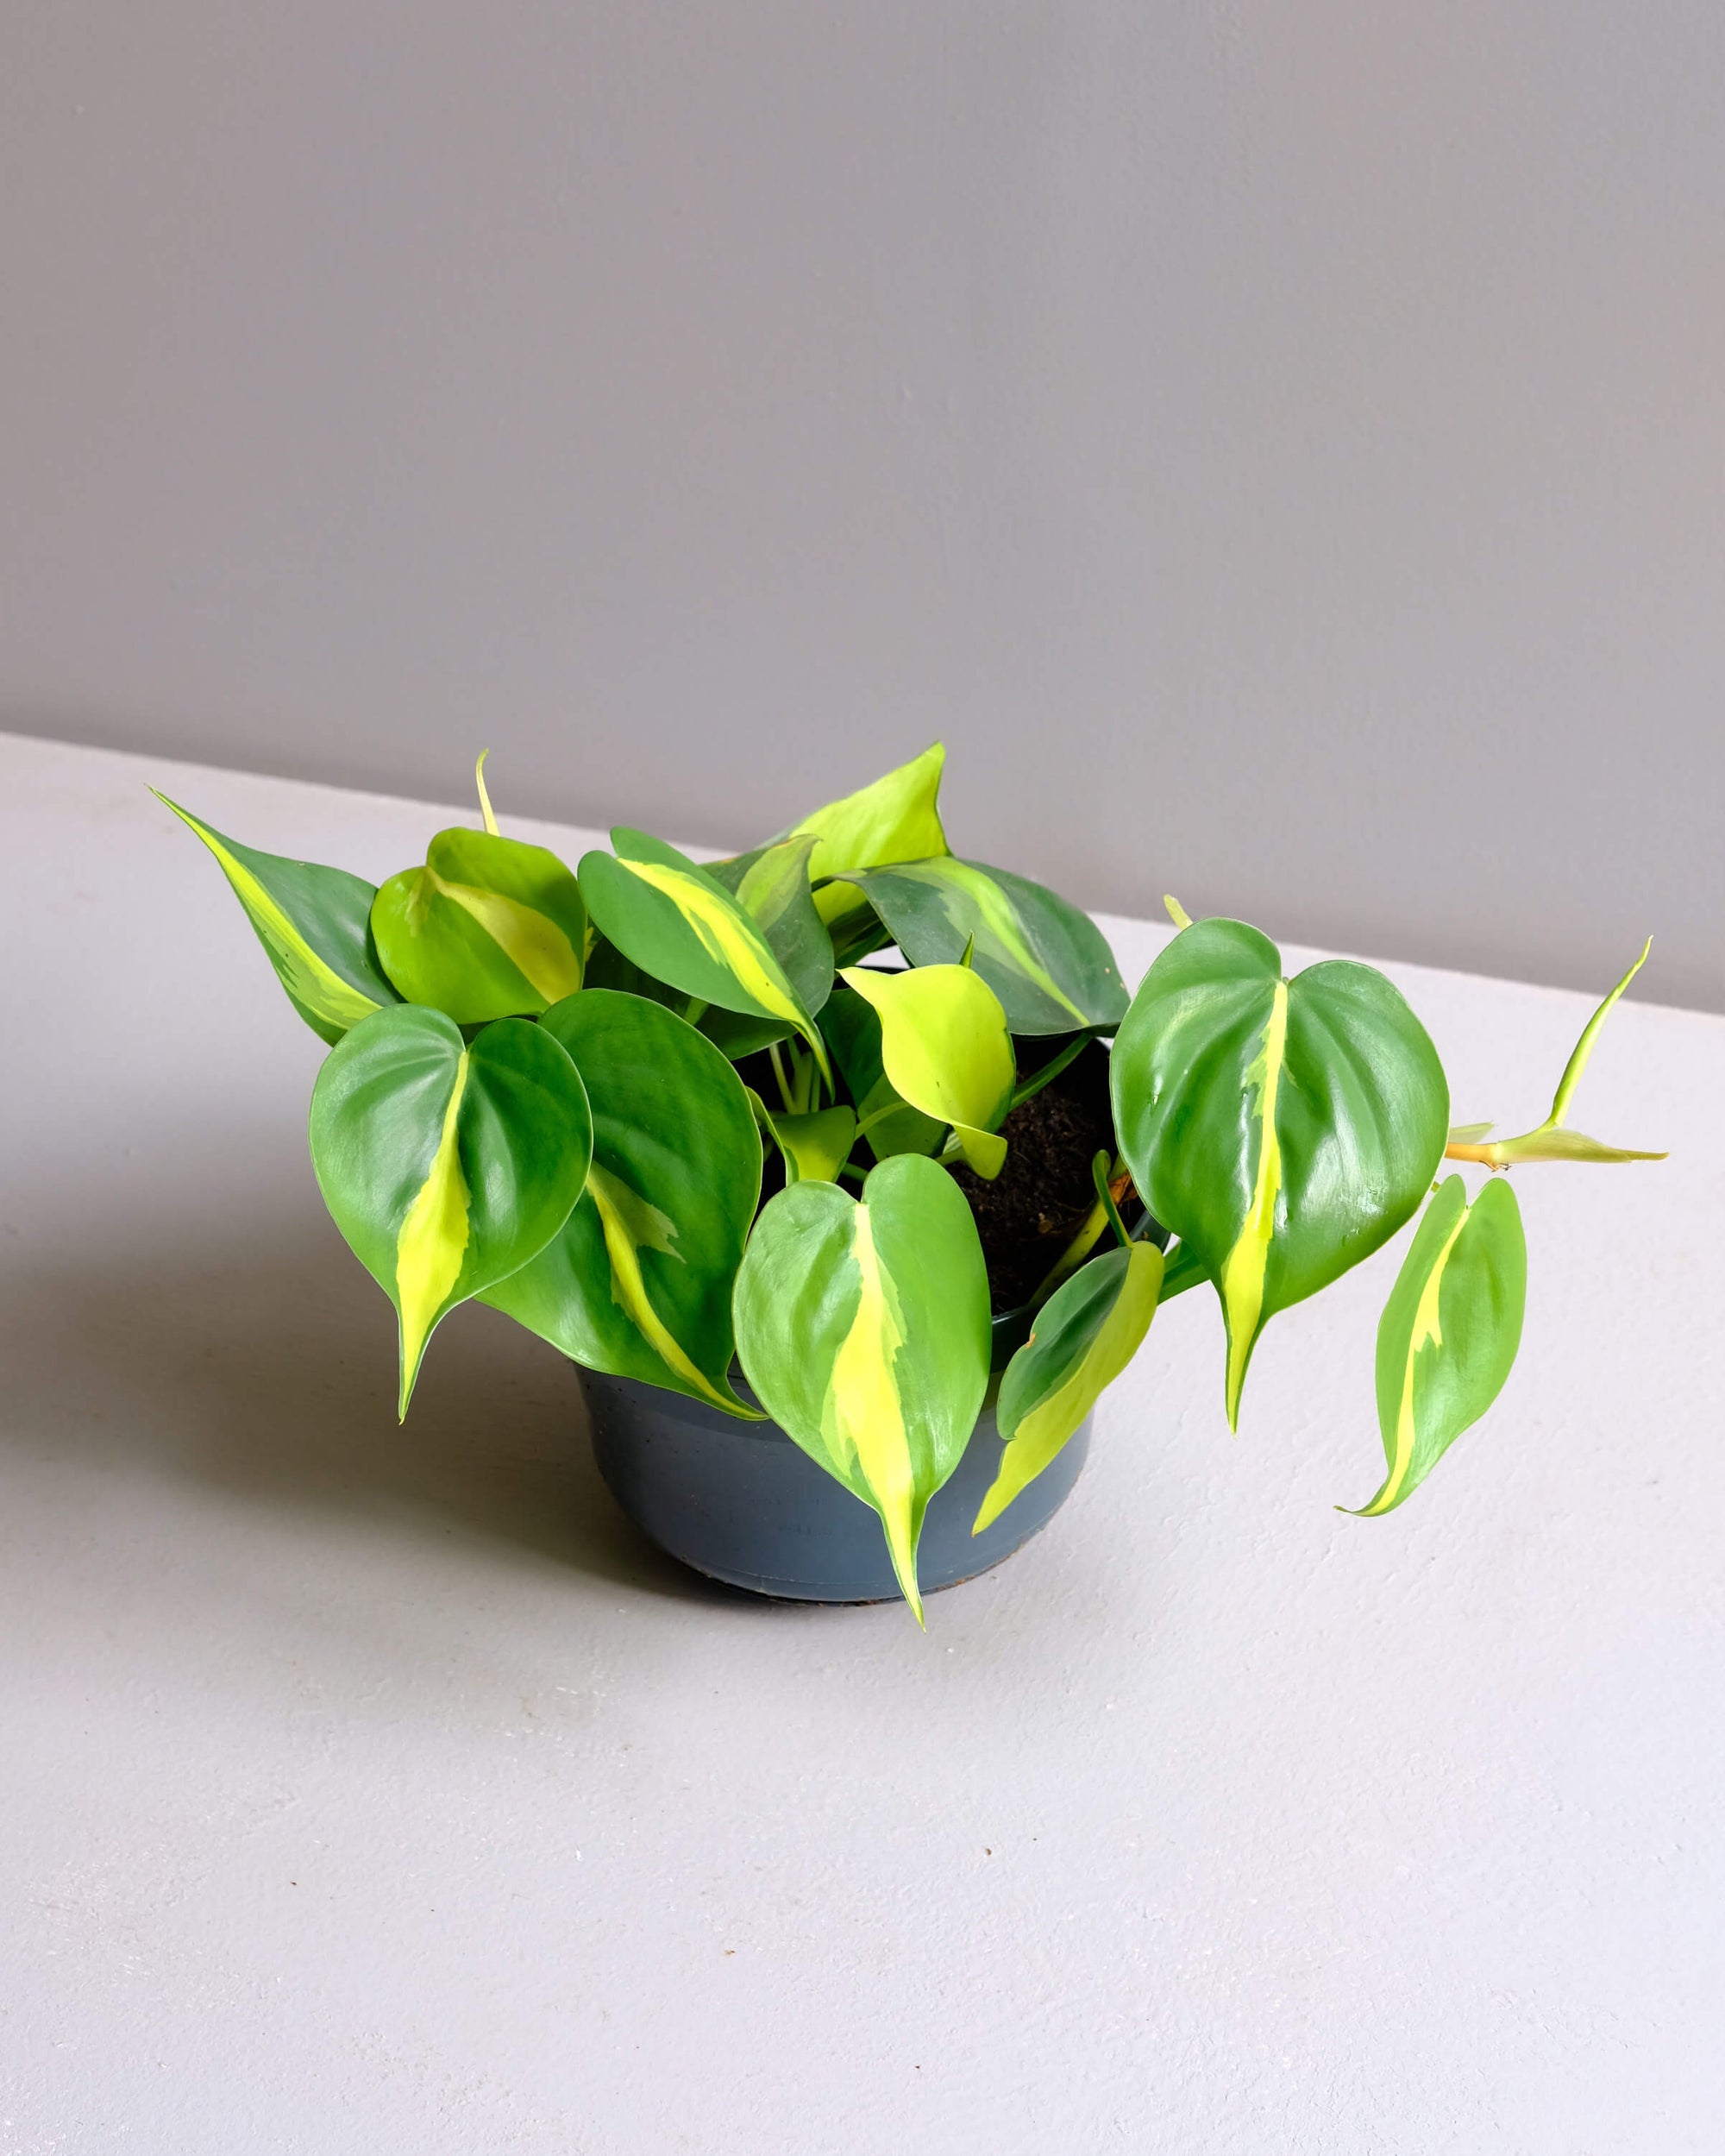 brasil philodendron Sweetheart Plant in plastic nursery pot_Philodendron Scandens